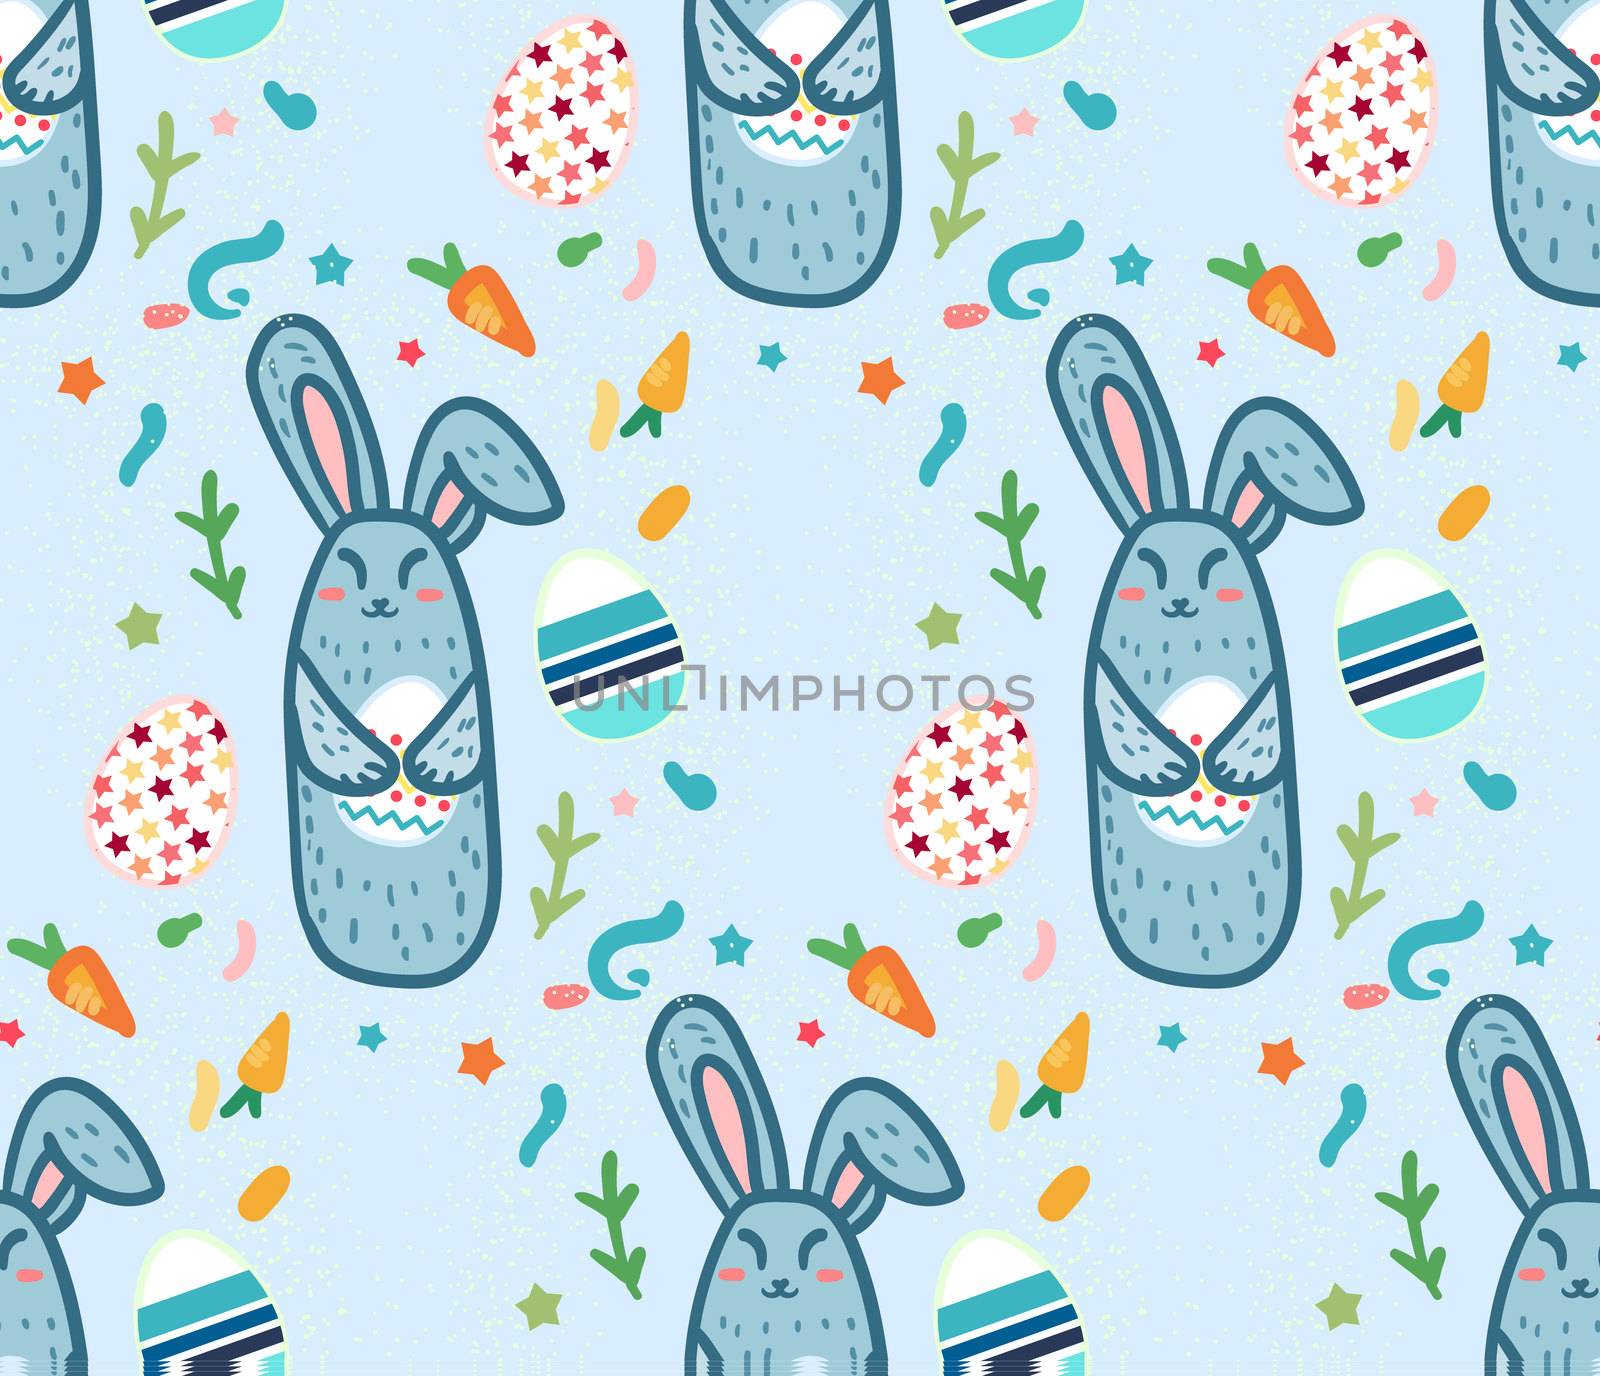 Happy Easter Seamless Pattern with cute rabbit and eggs. Template for print, fabric, wrapping, wallpaper, greeting background. Vector